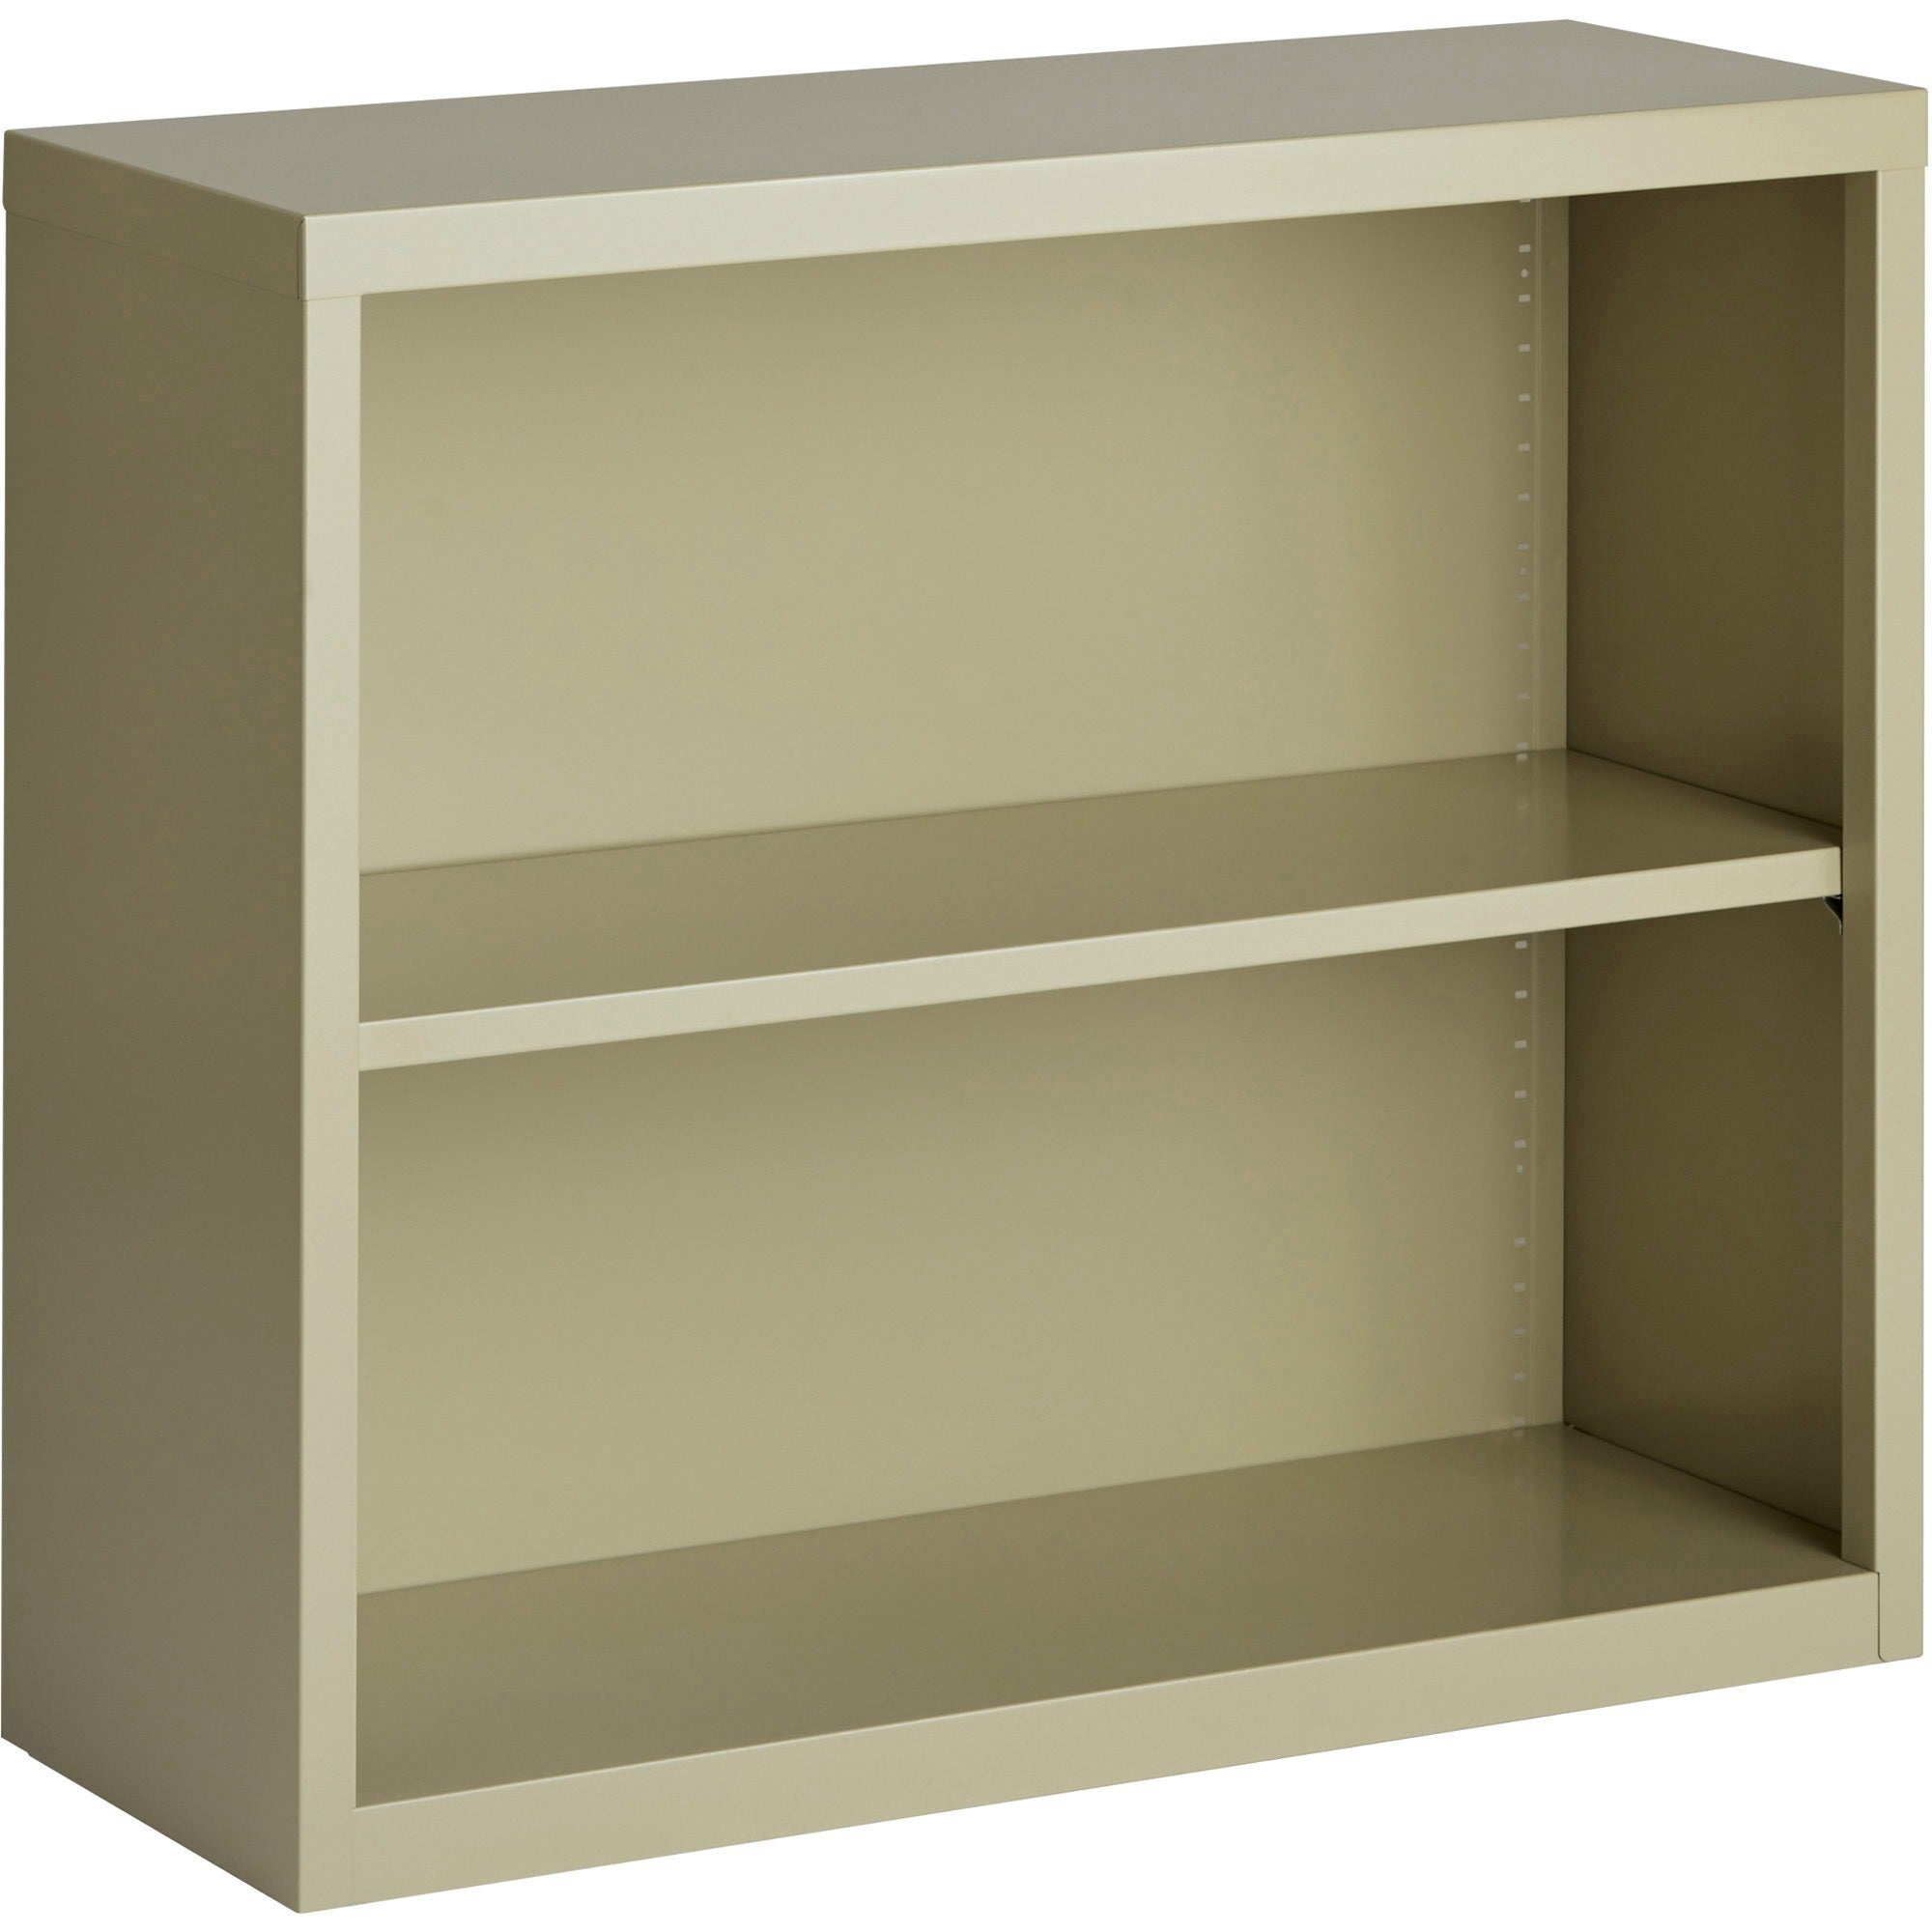 Lorell Fortress Series Bookcase - 34.5" x 13" x 30" - 2 x Shelf(ves) - Putty - Powder Coated - Steel - Recycled - 